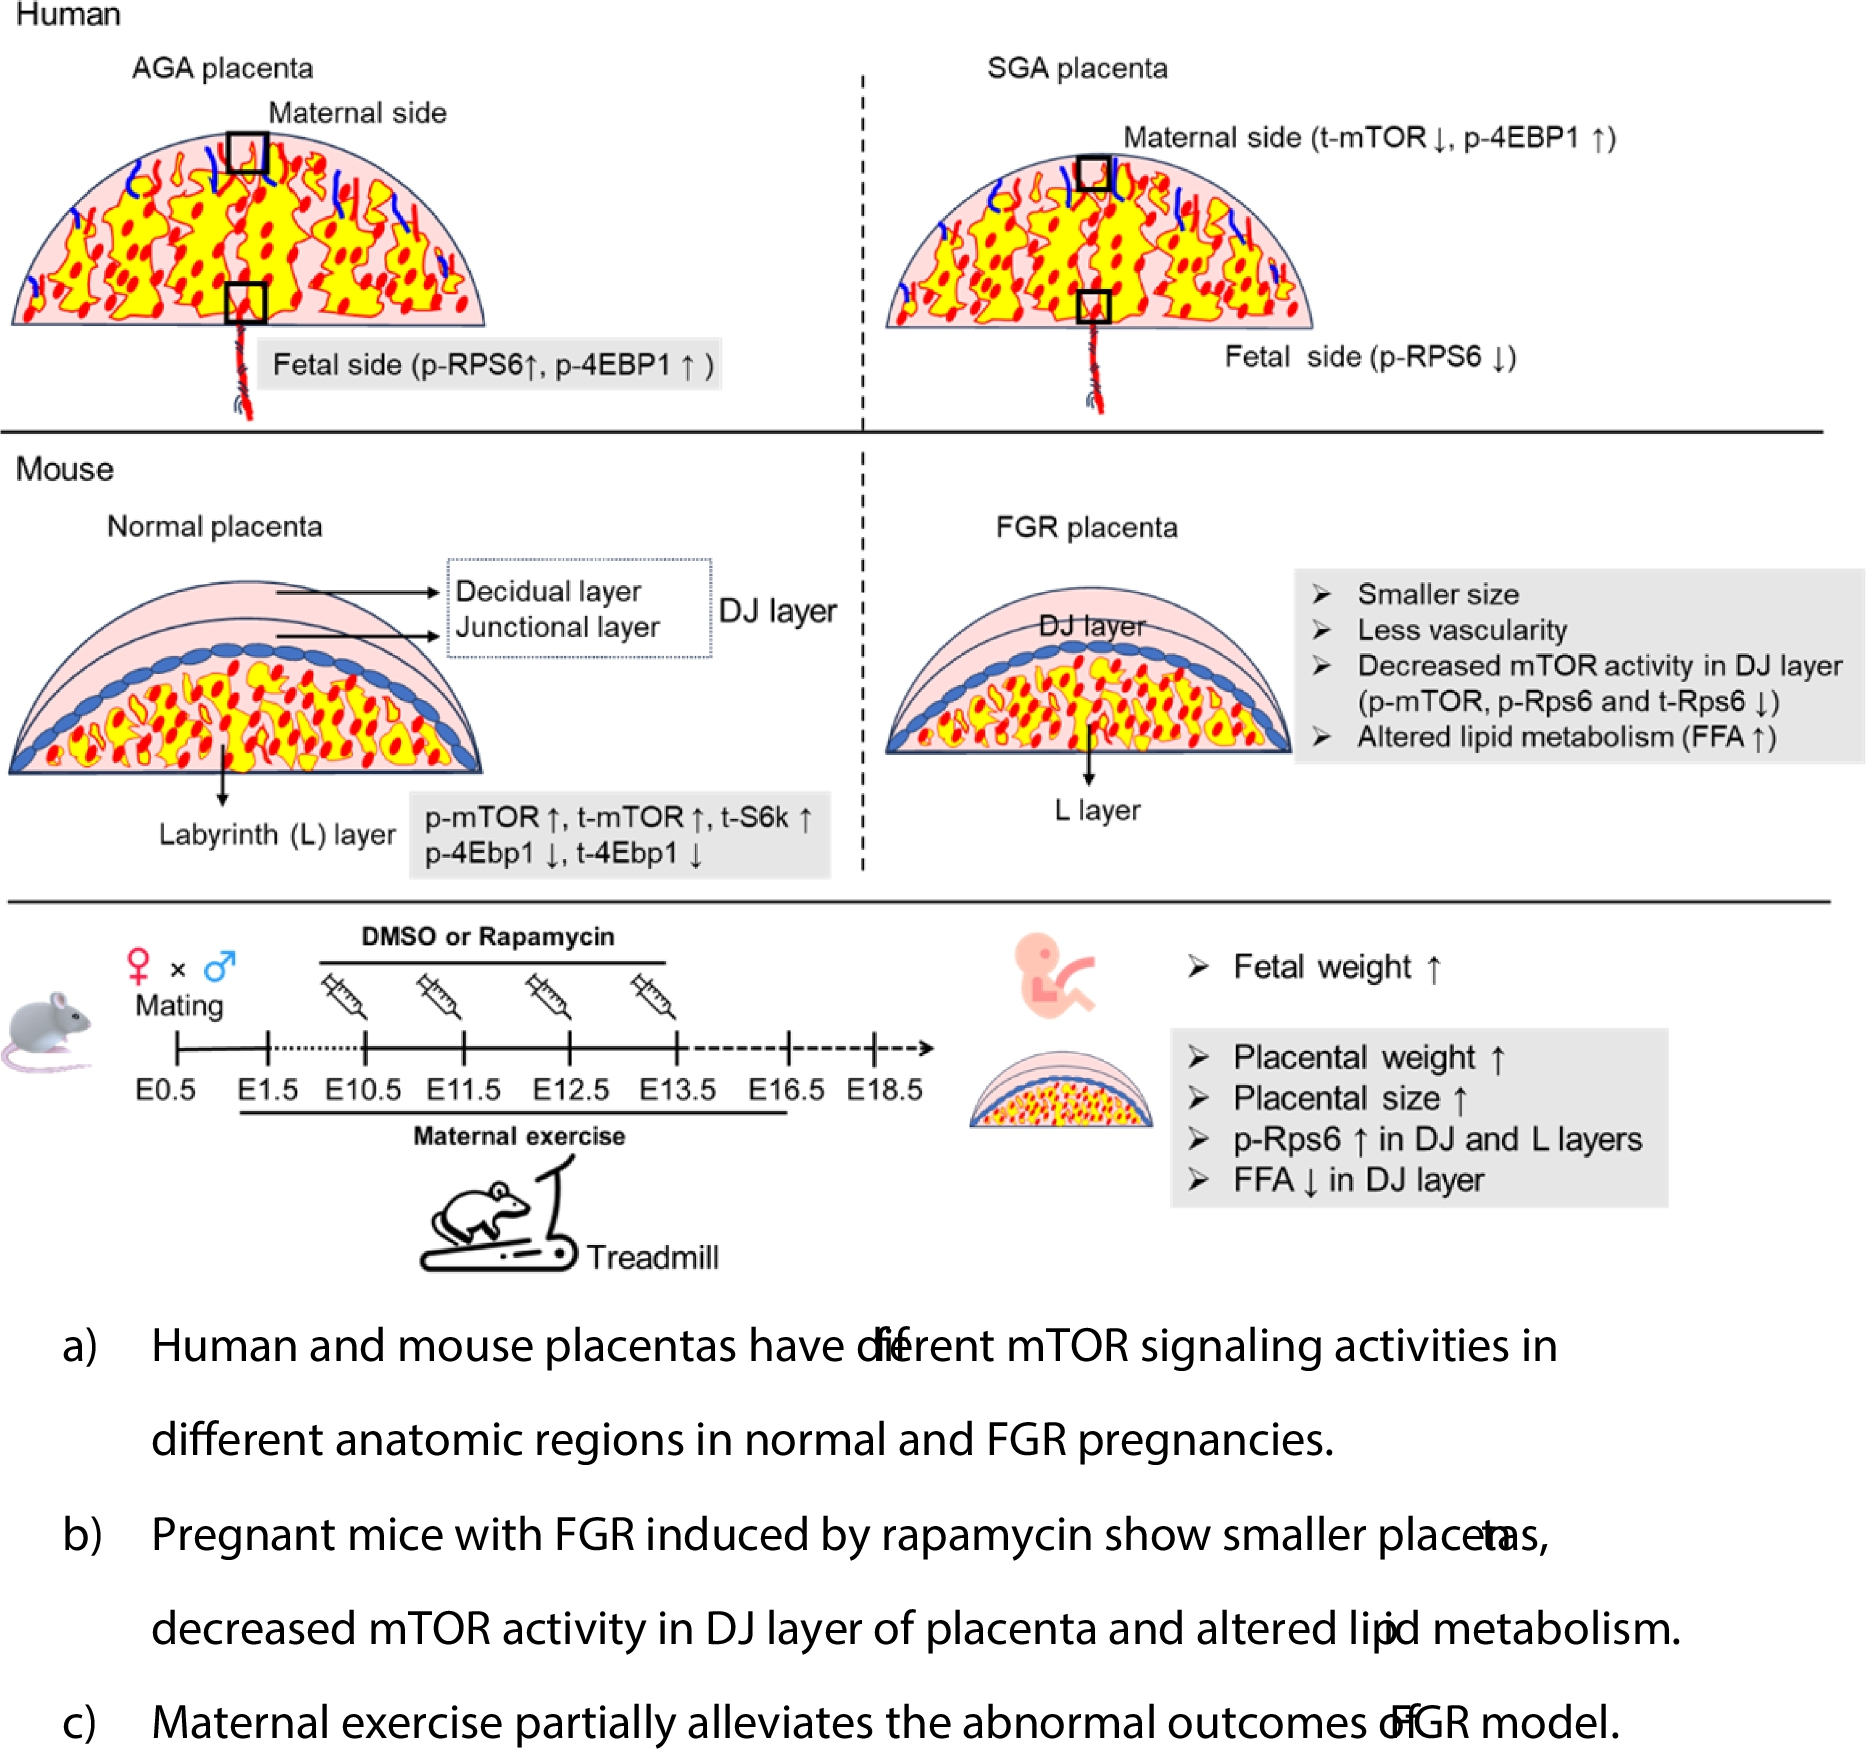 Fetal growth restriction exhibits various mTOR signaling in different regions of mouse placentas with altered lipid metabolism